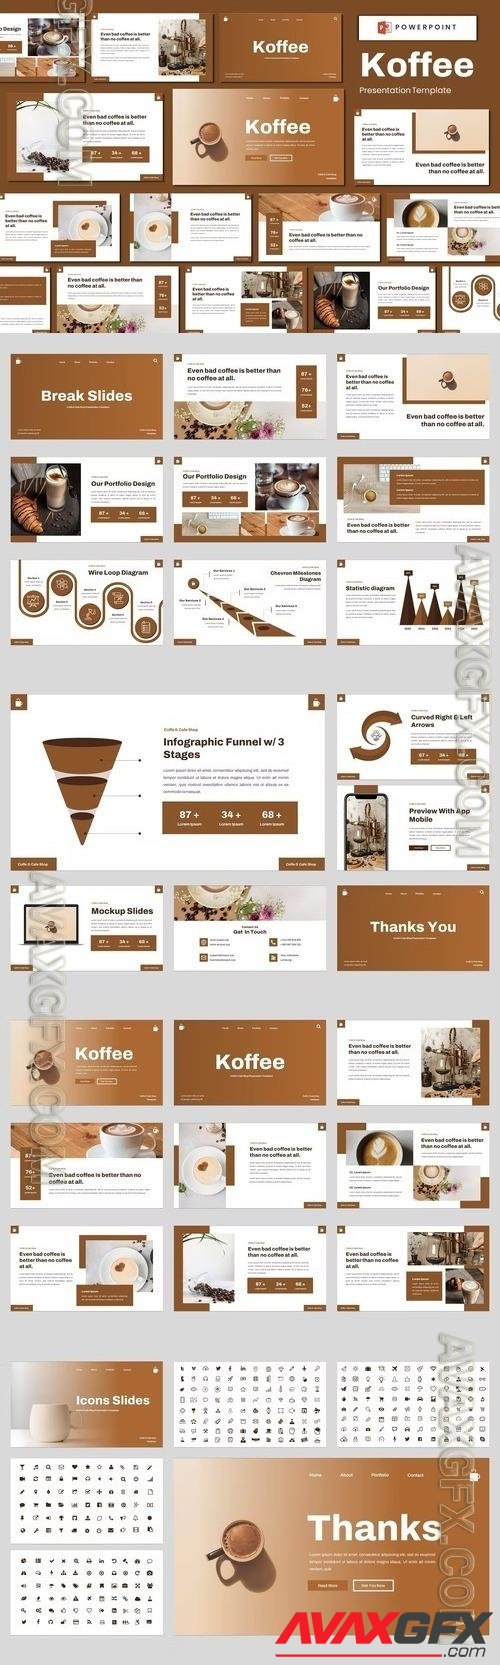 Koffee - Coffe & Cafe Shop Powerpoint Template KHGV6WY